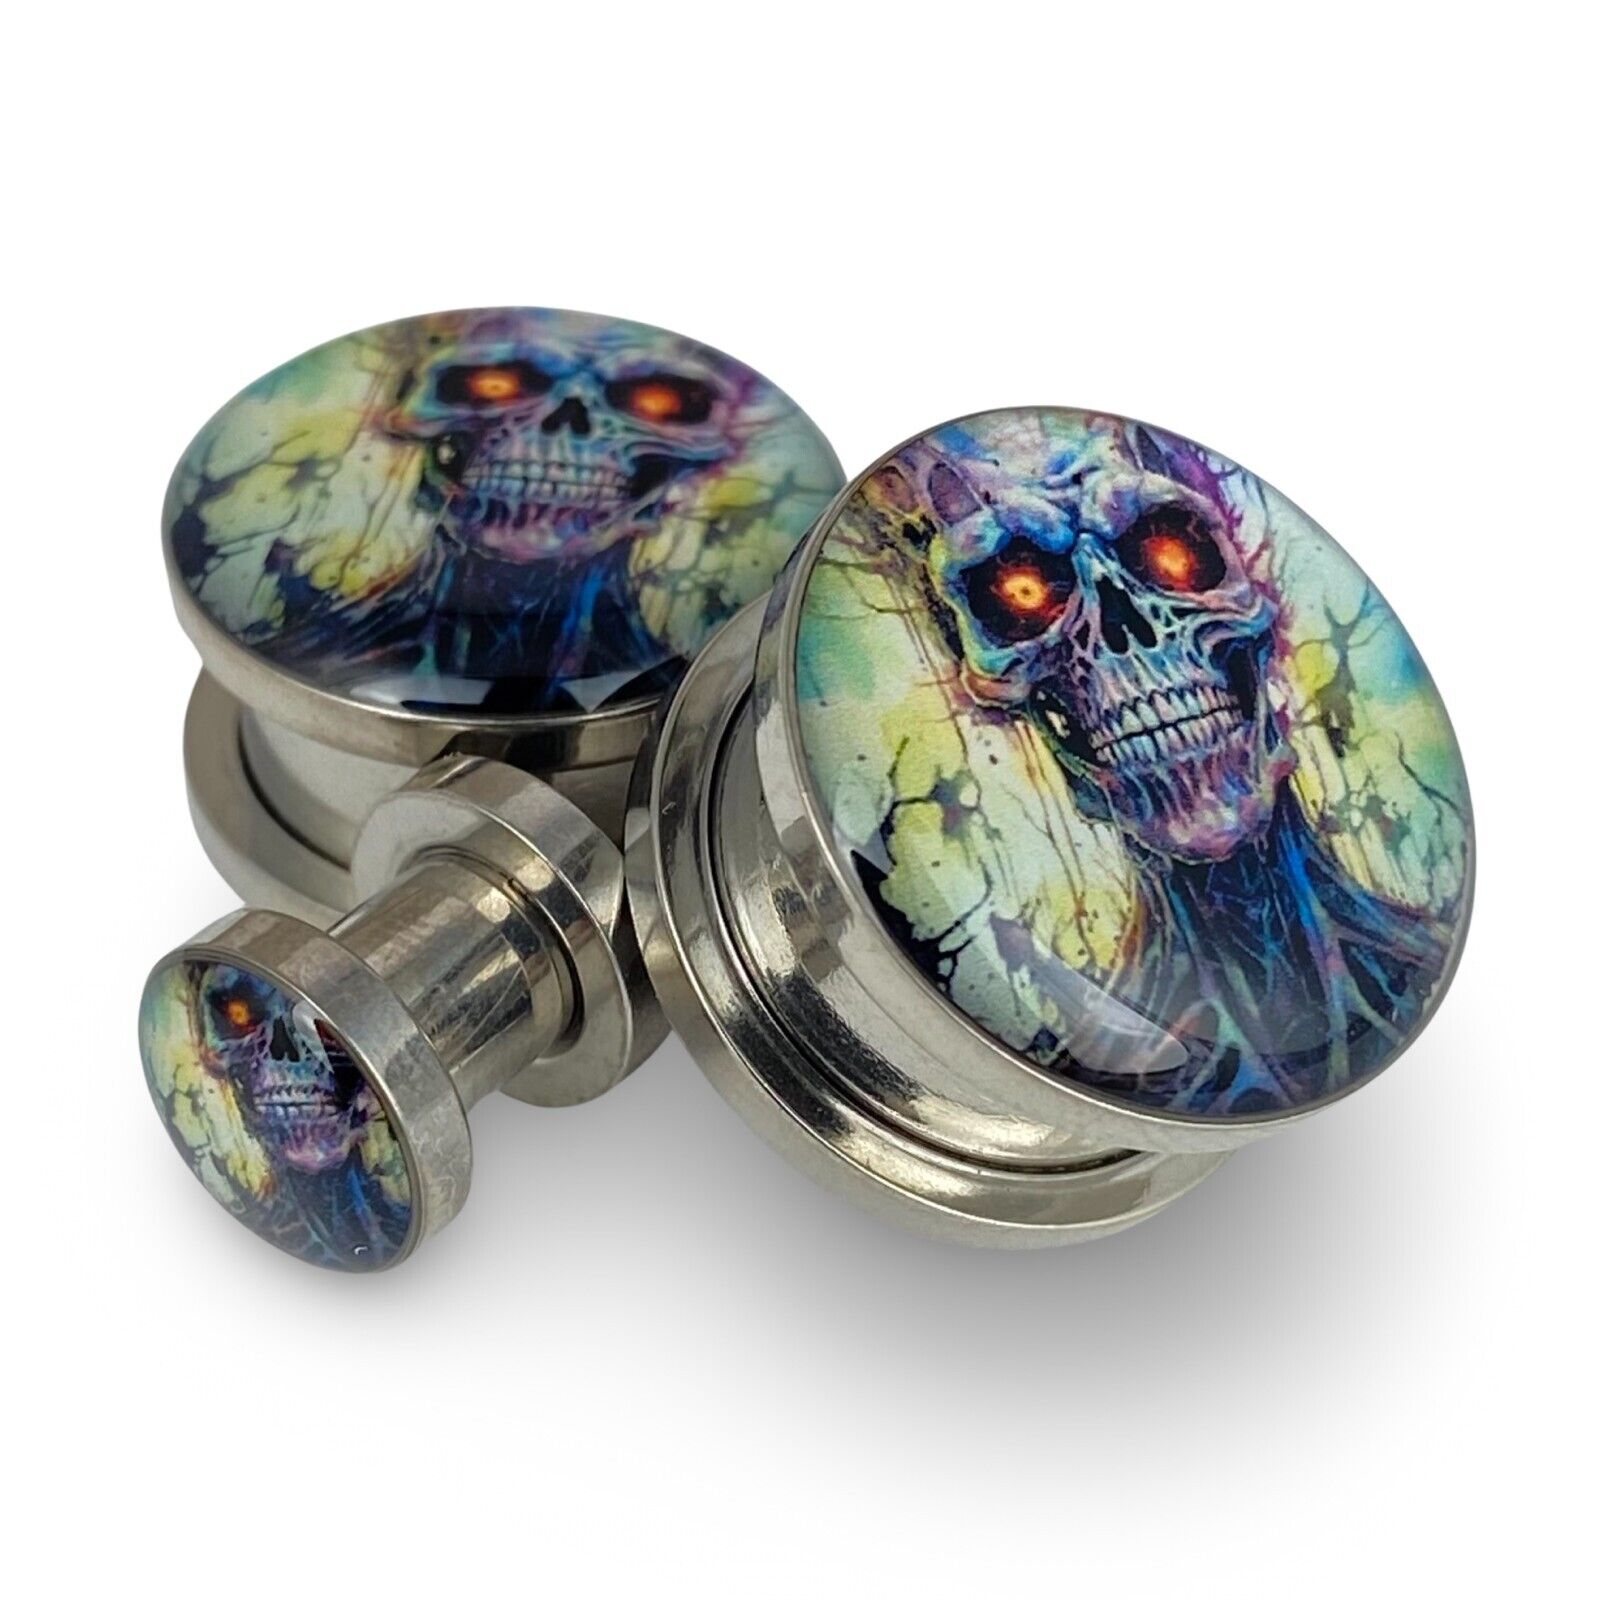 Pair of Zombie Picture Plugs (MTO-076) gauges 14g thru 1 inch